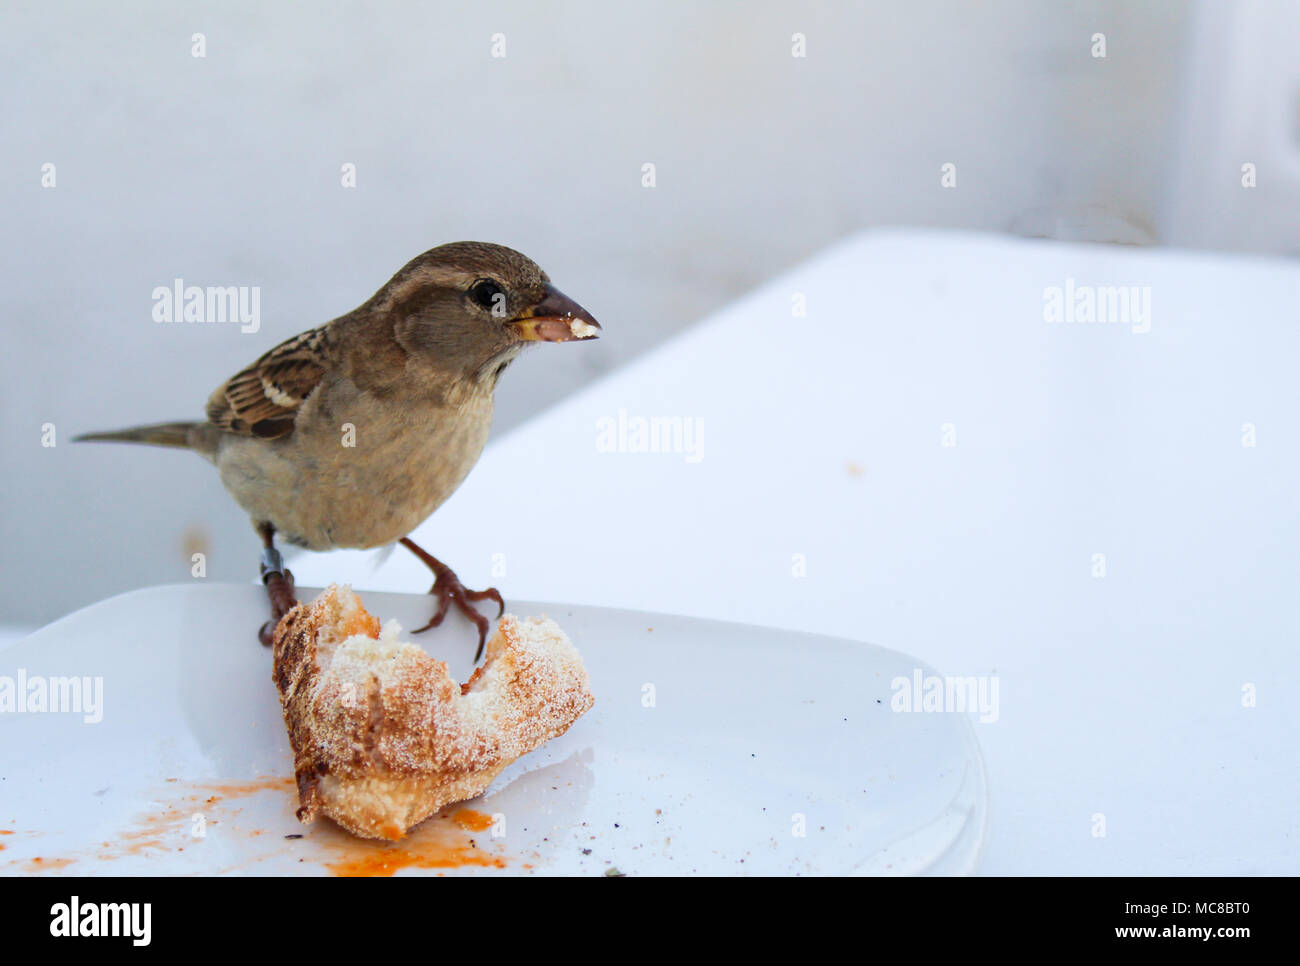 male hungry Sparrow stealing pizza from the plate Stock Photo